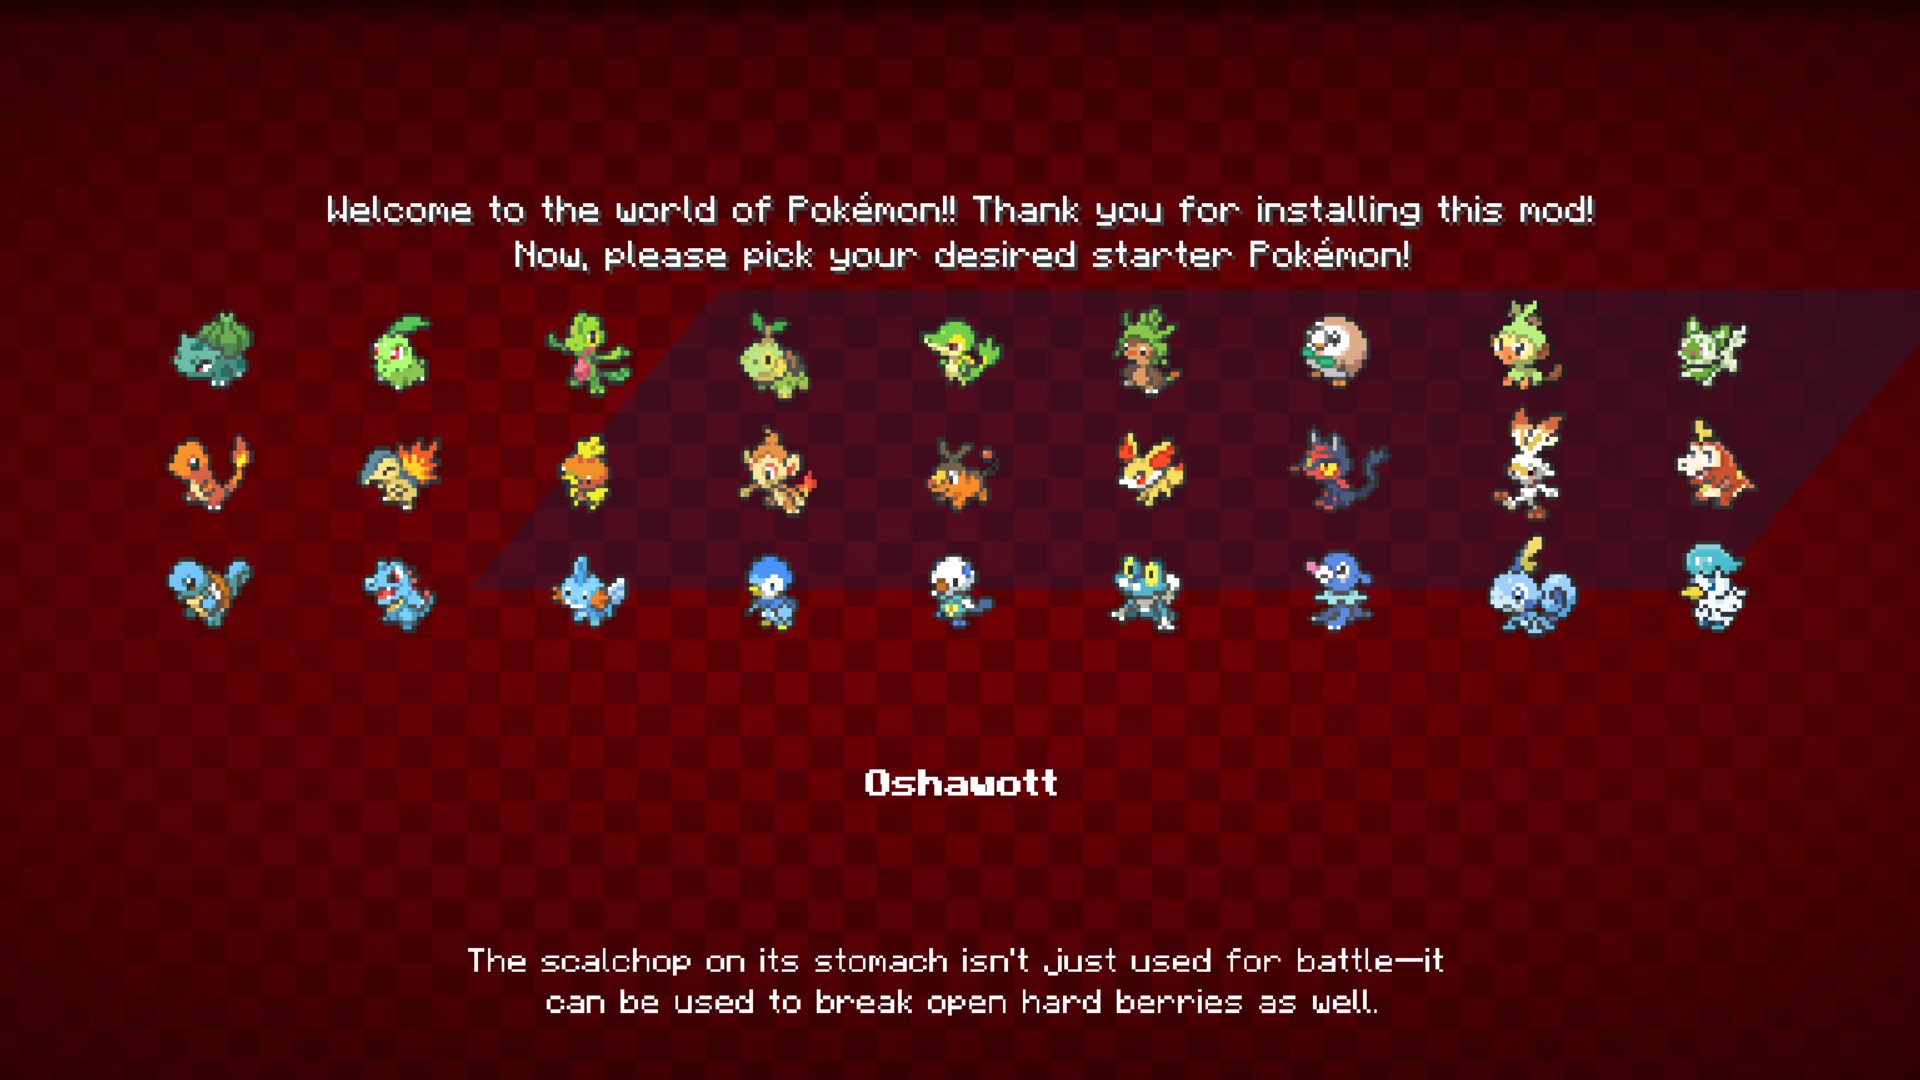 Pokemon Trainer Red & All of his Pokemons Minecraft Map